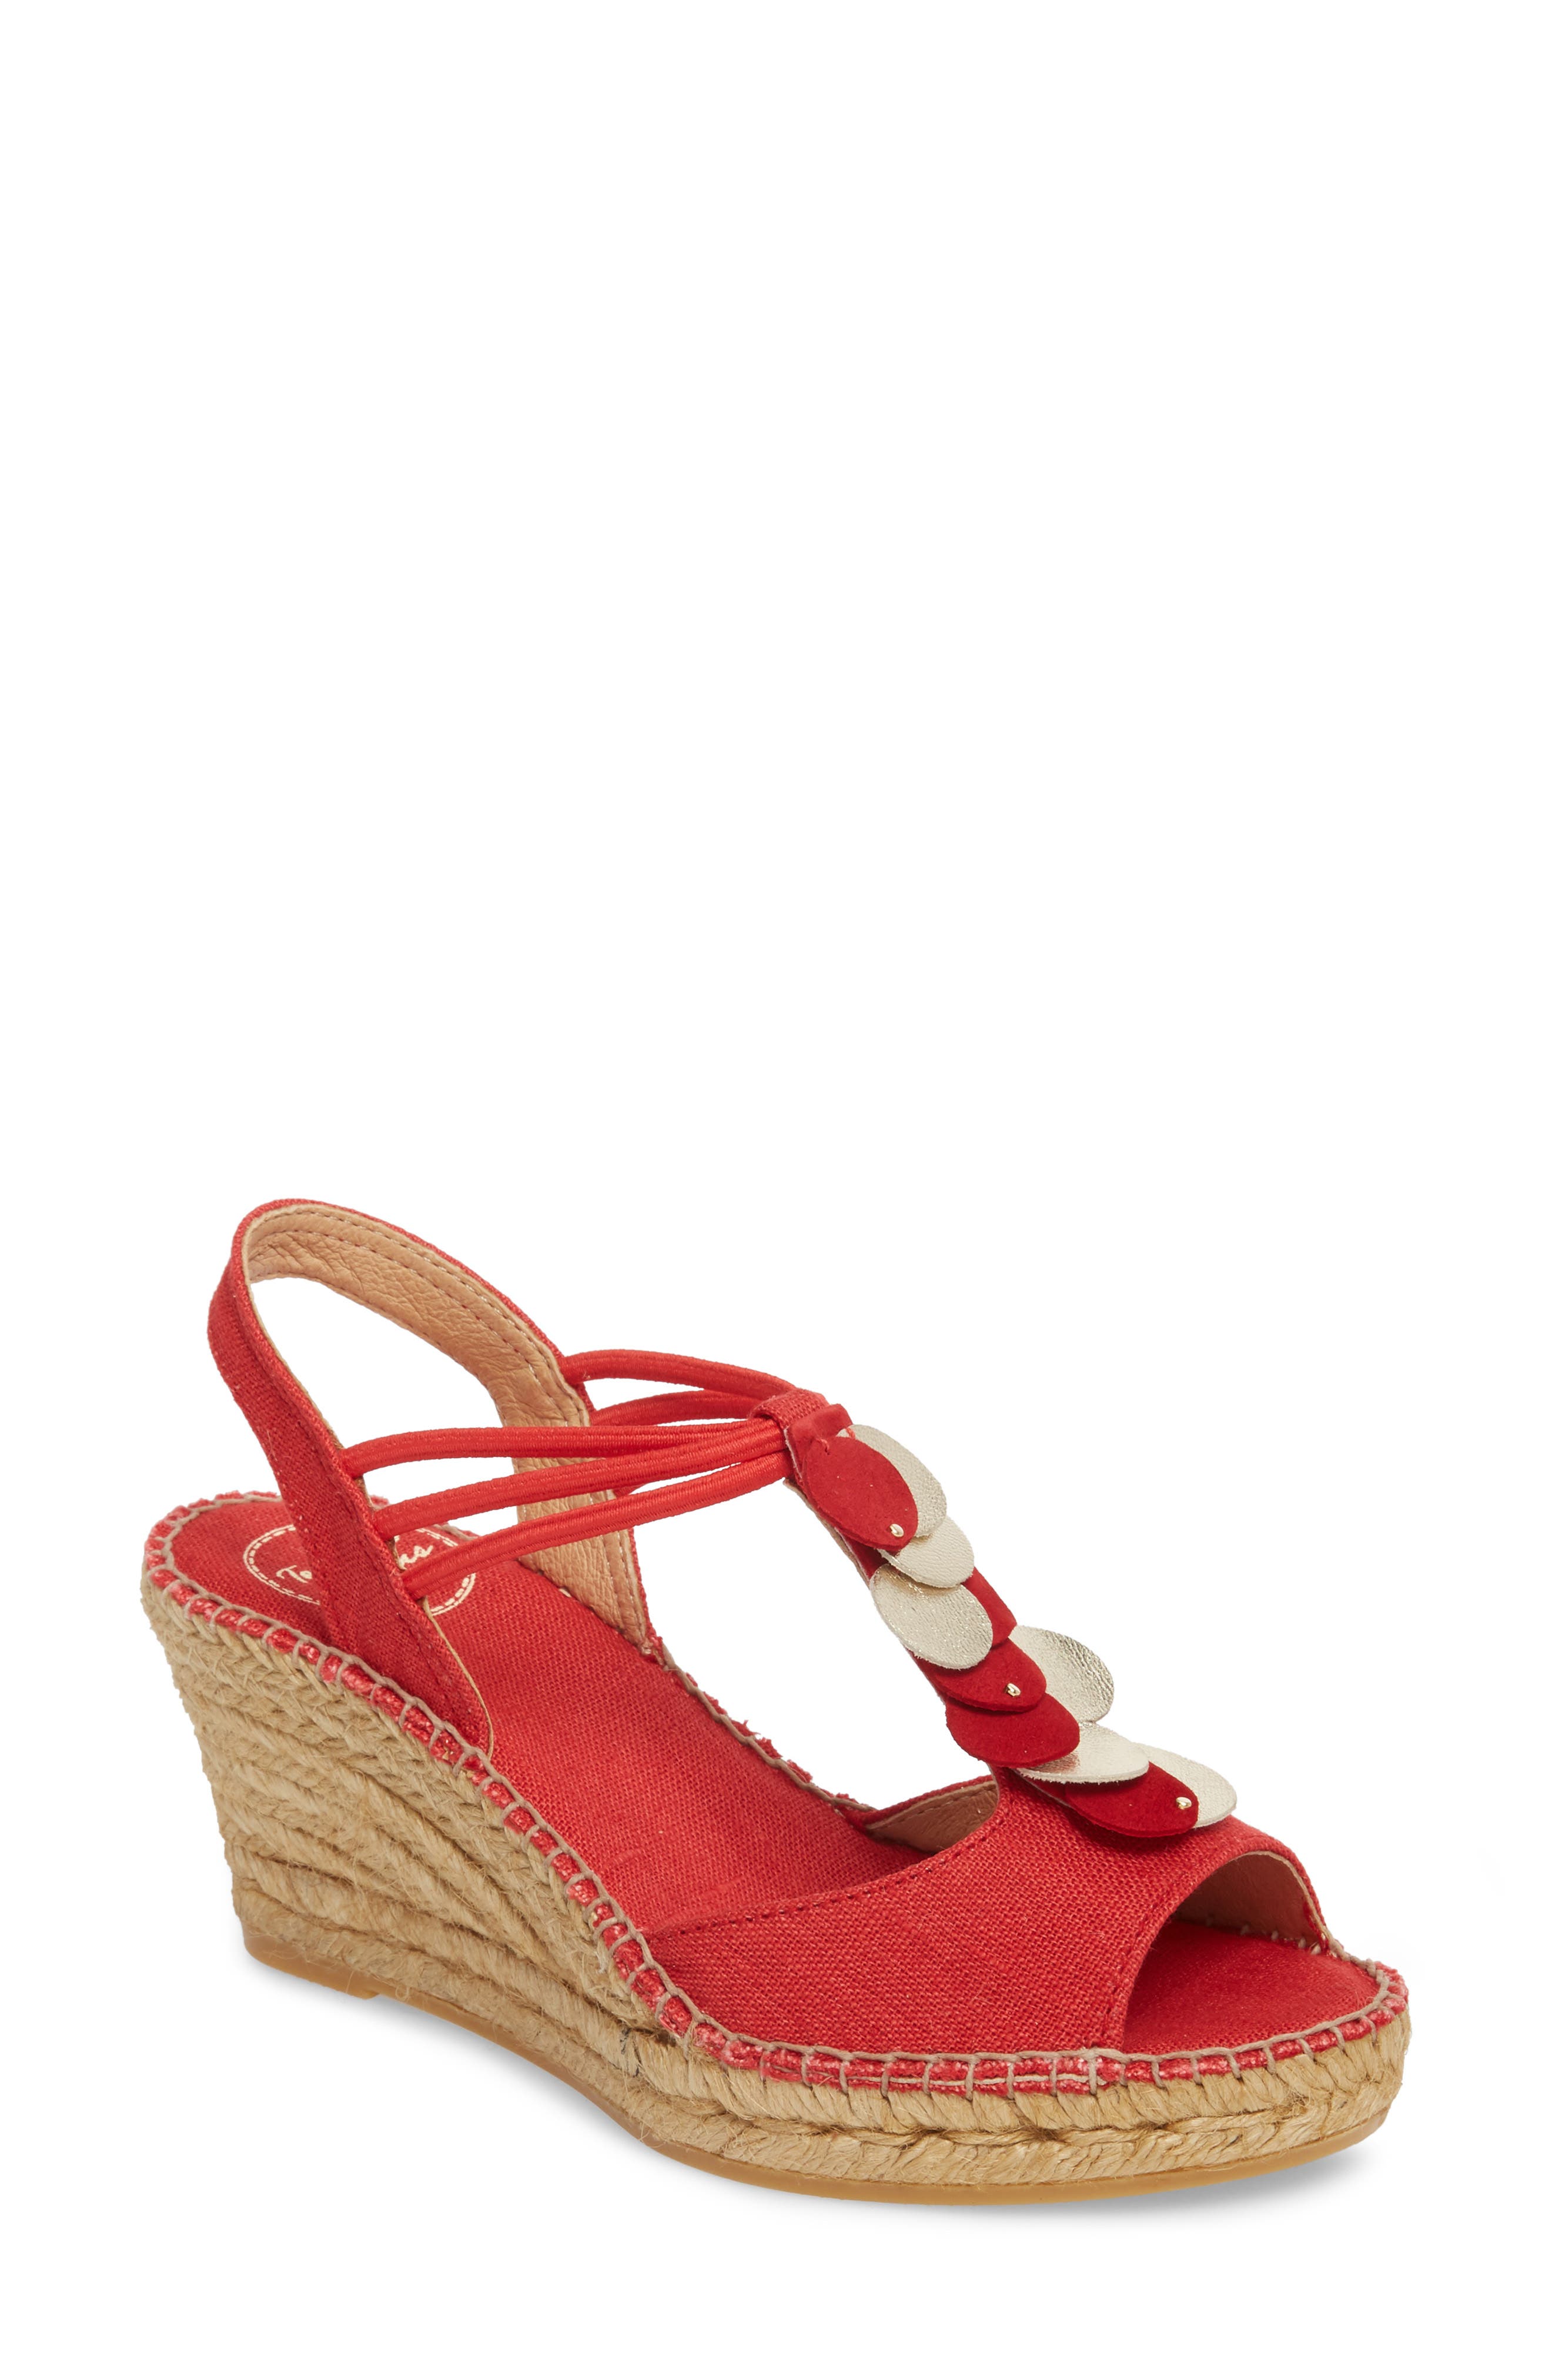 Valencia Wraparound Espadrille Wedge in Red Fabric at Nordstrom Nordstrom Women Shoes High Heels Wedges Wedge Sandals 